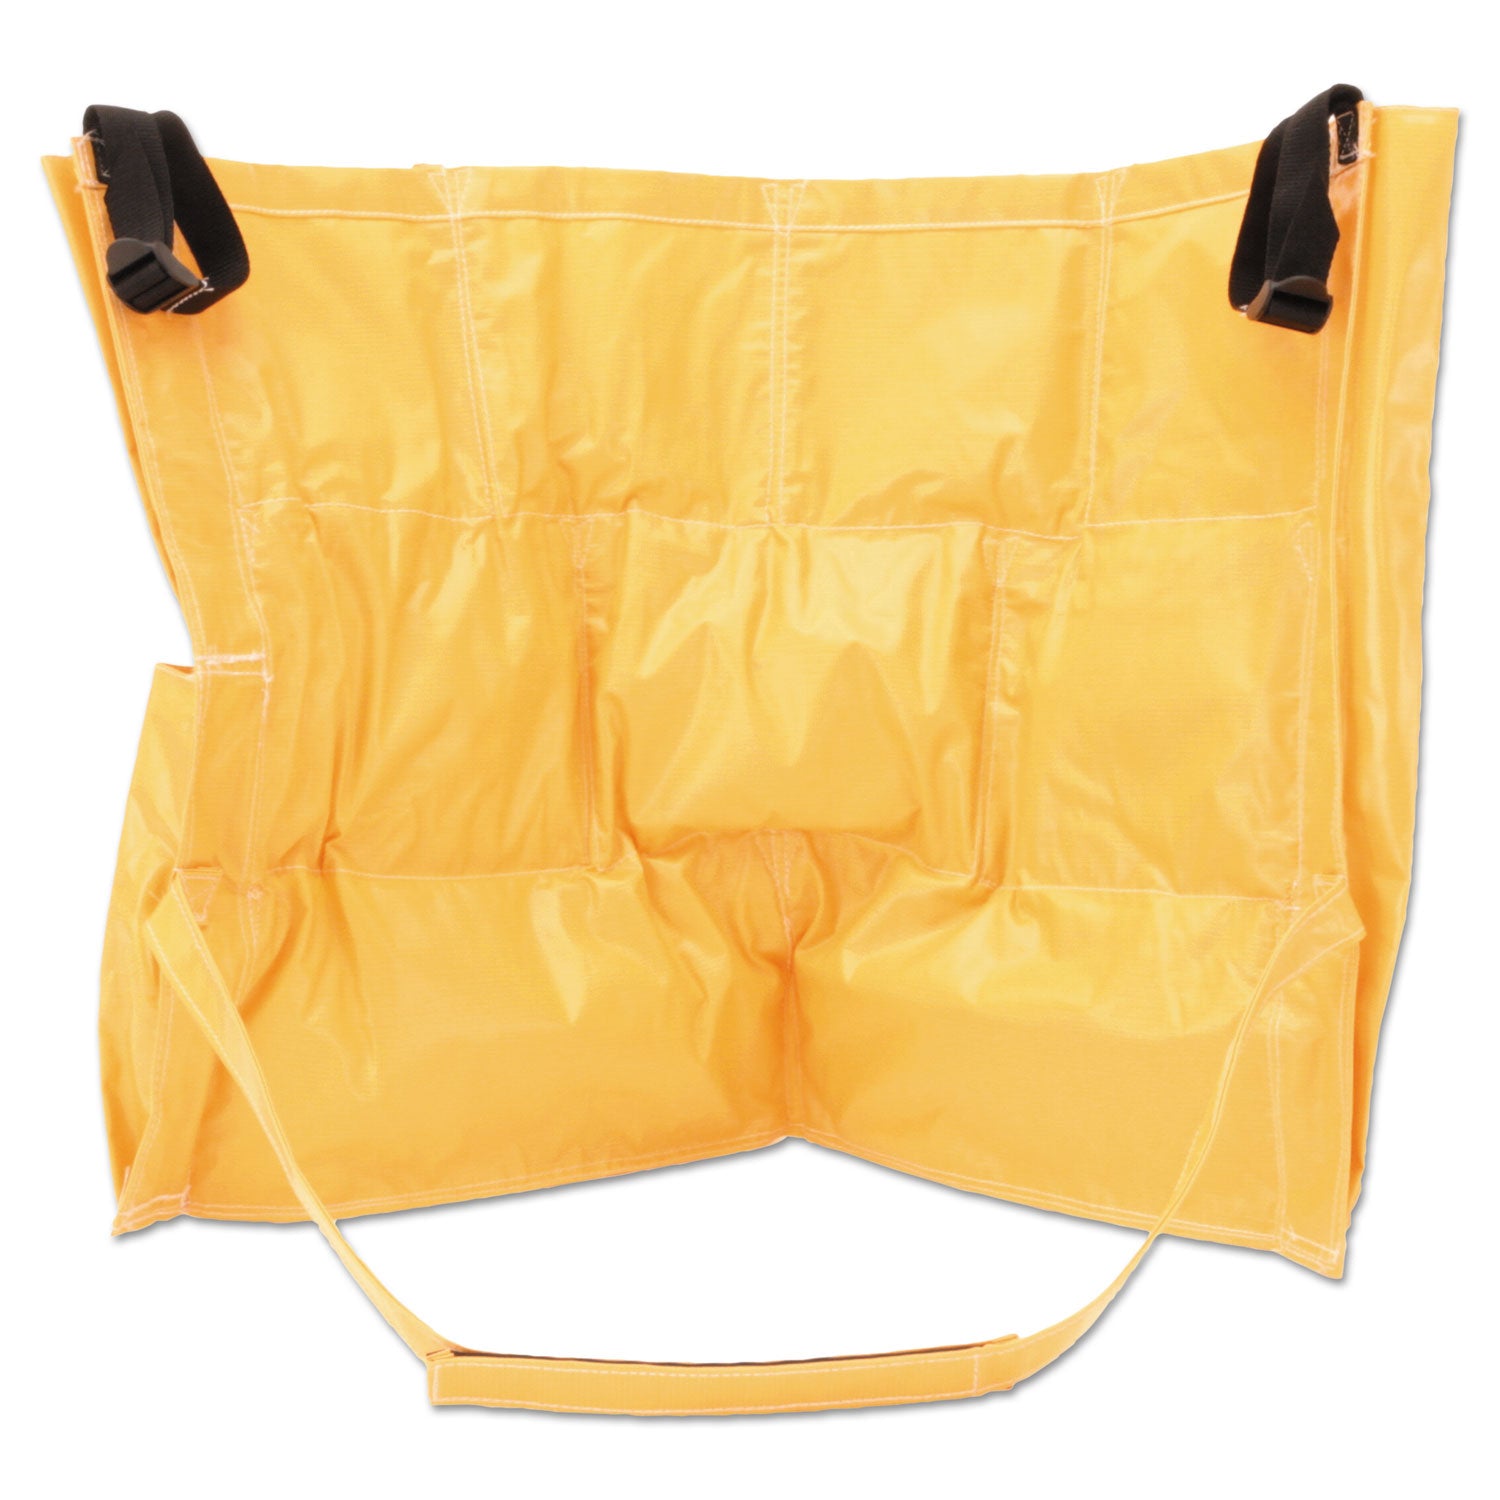 Brute Caddy Bag, 12 Compartments, Yellow - 